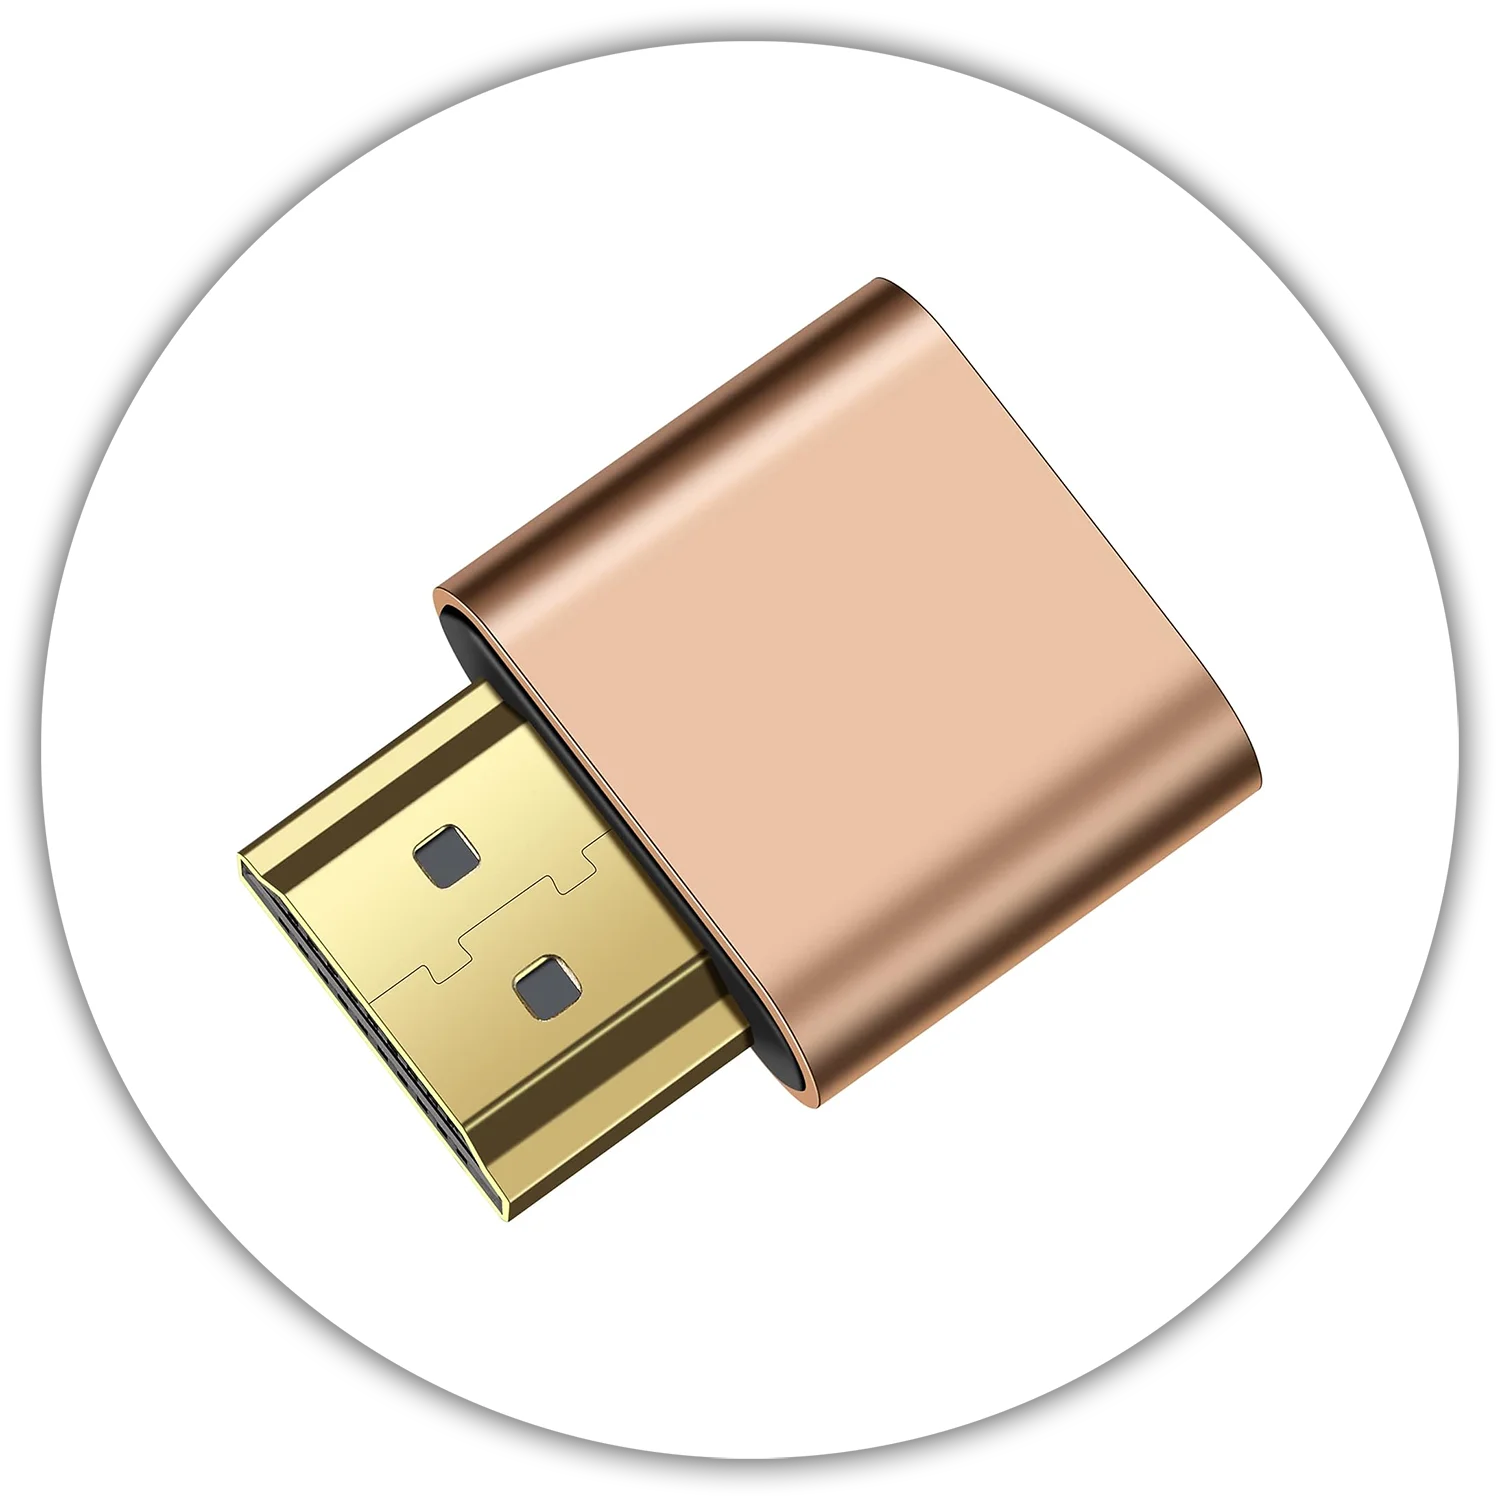 An image of a small rose gold colored HDMI dongle.